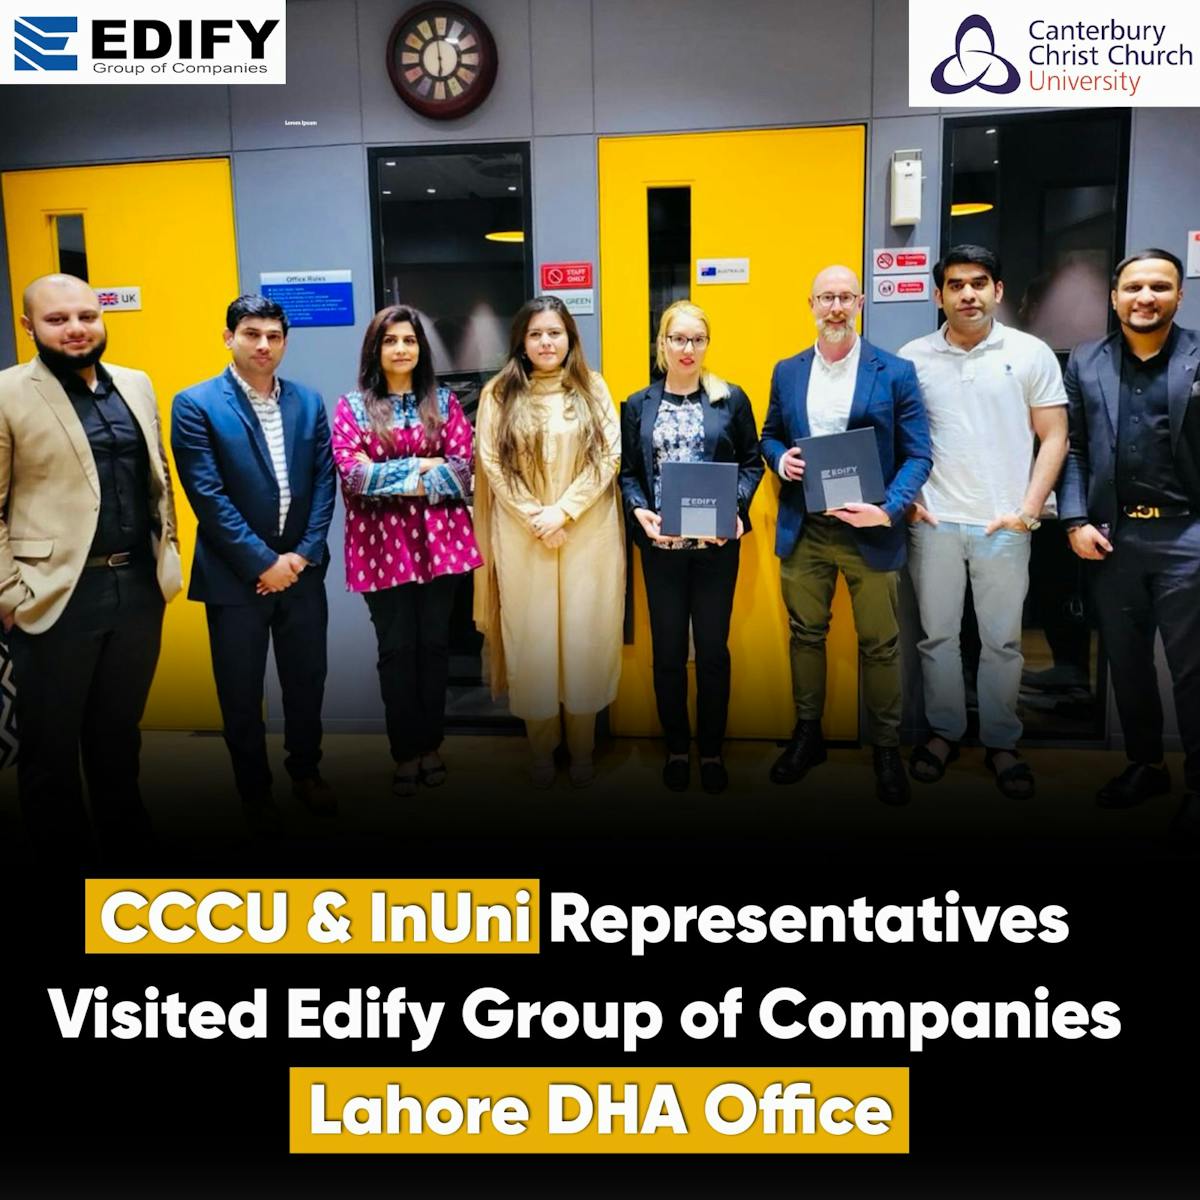 Exciting news! Representatives from InUni & Canterbury Christ Church University (CCCU) paid a visit to our Lahore DHA Office. It was a fantastic opportunity to deepen our partnership and explore collaborative initiatives to enhance education opportunities. Here's to future endeavours!